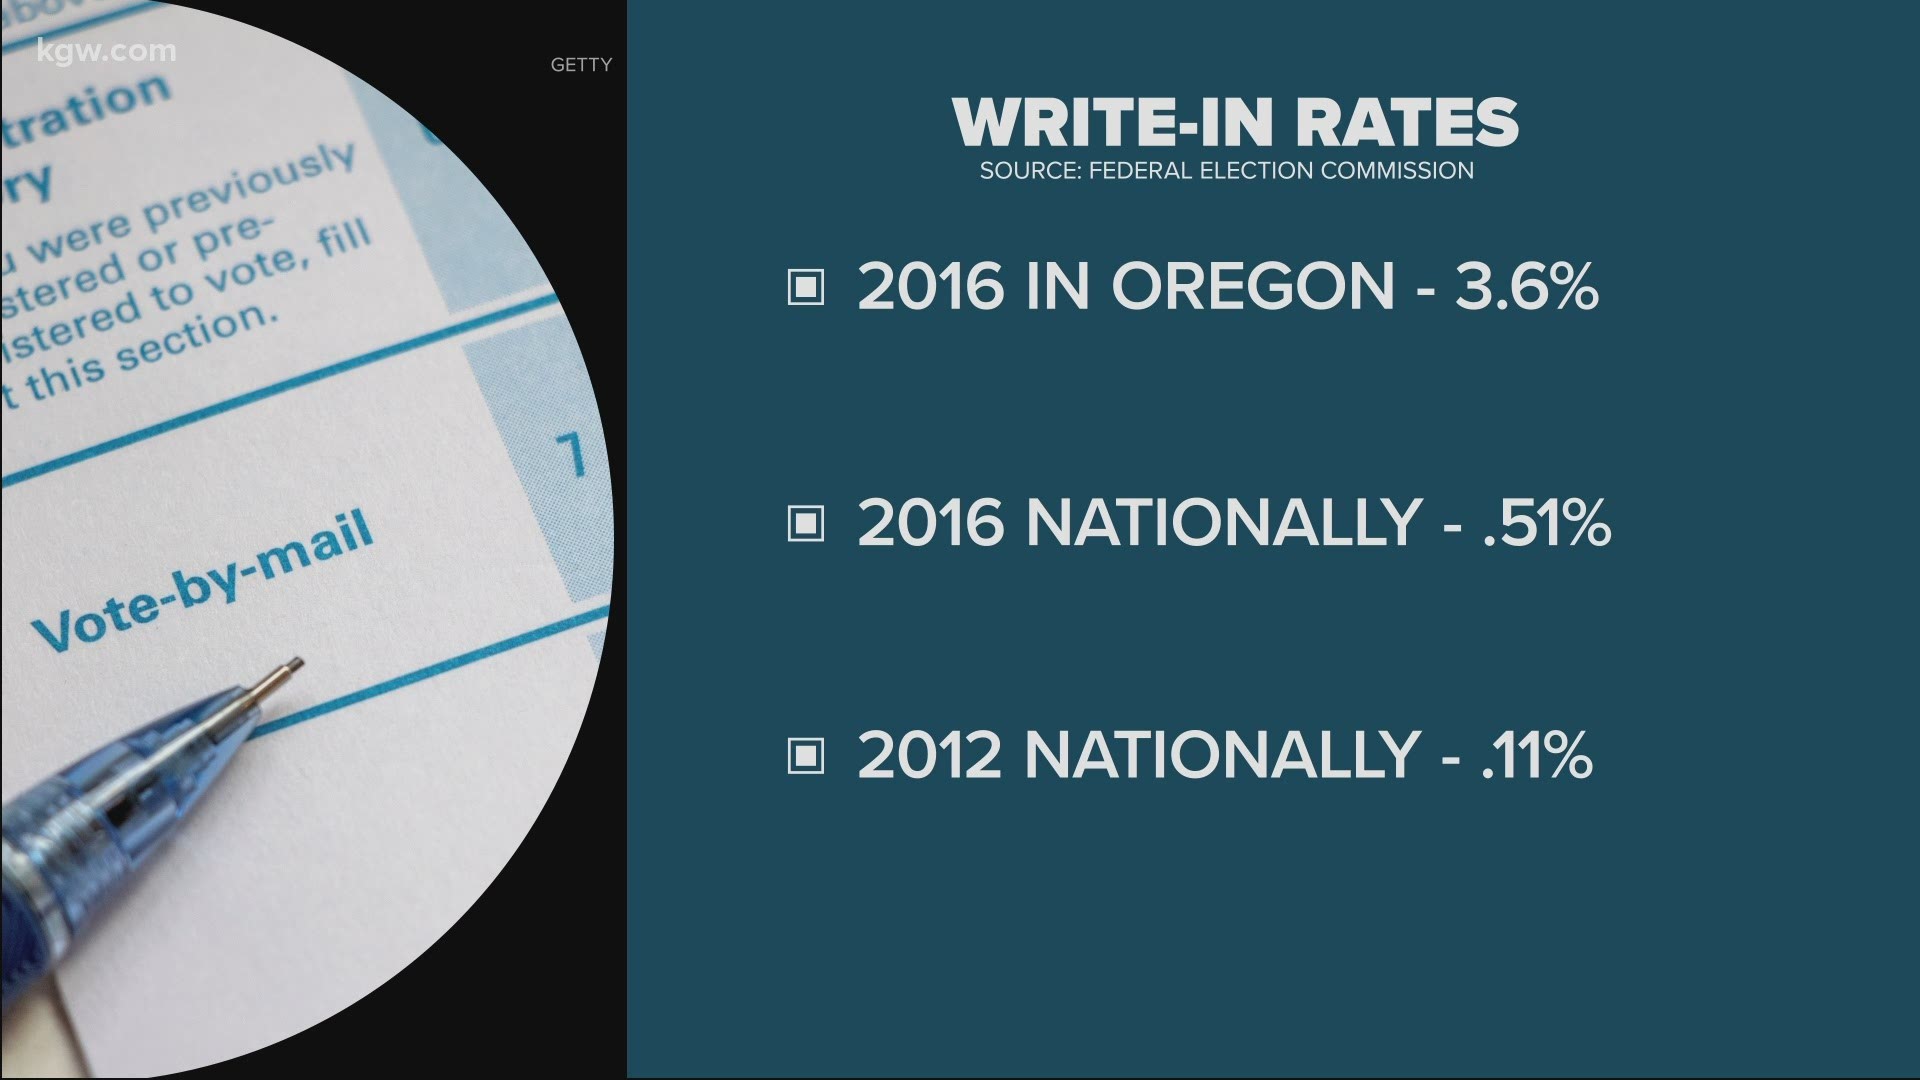 Why is Oregon so popular for write-in campaigns?